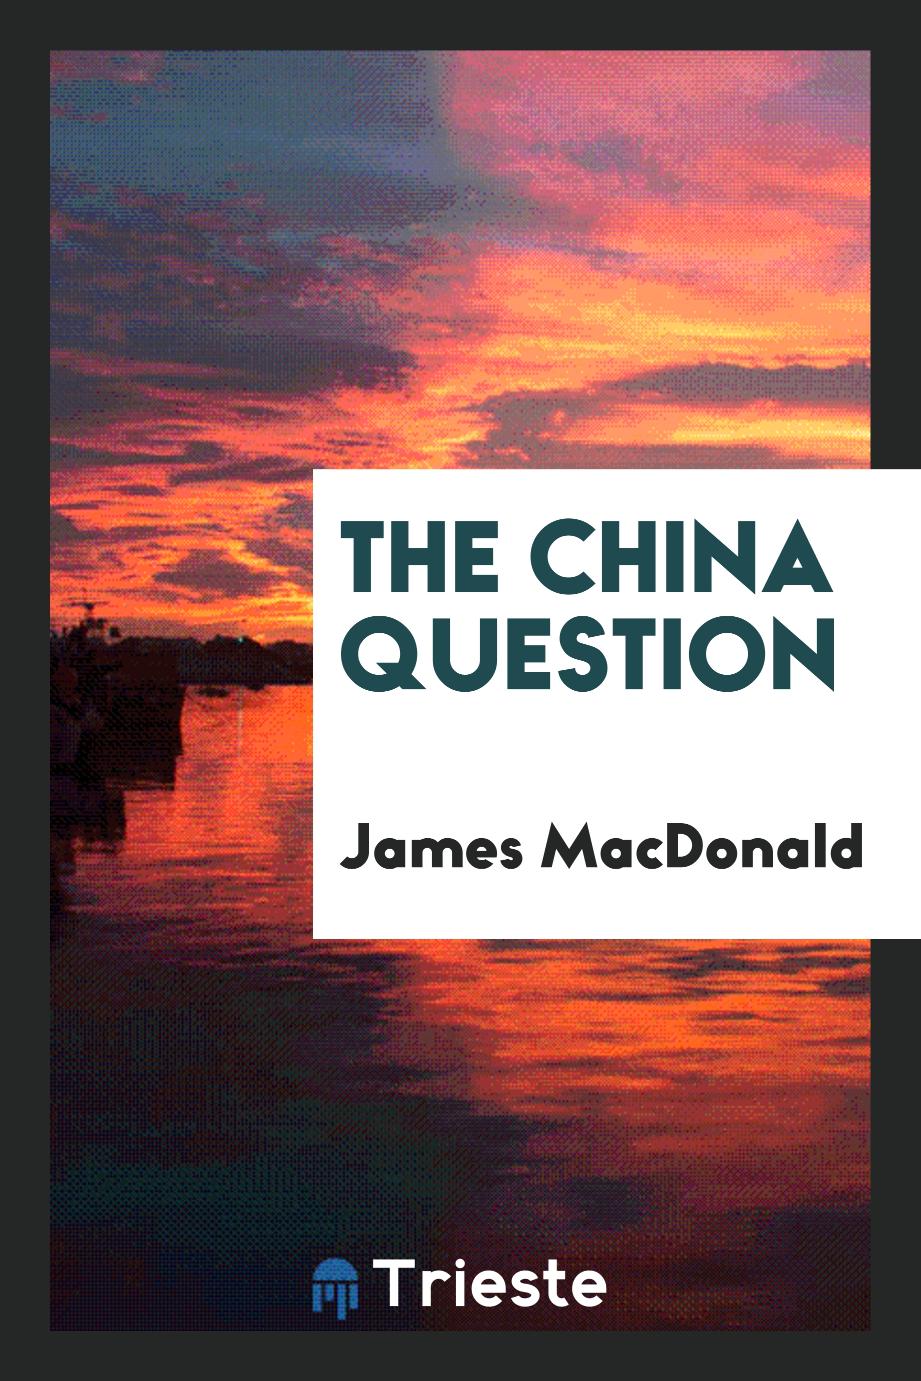 The China question